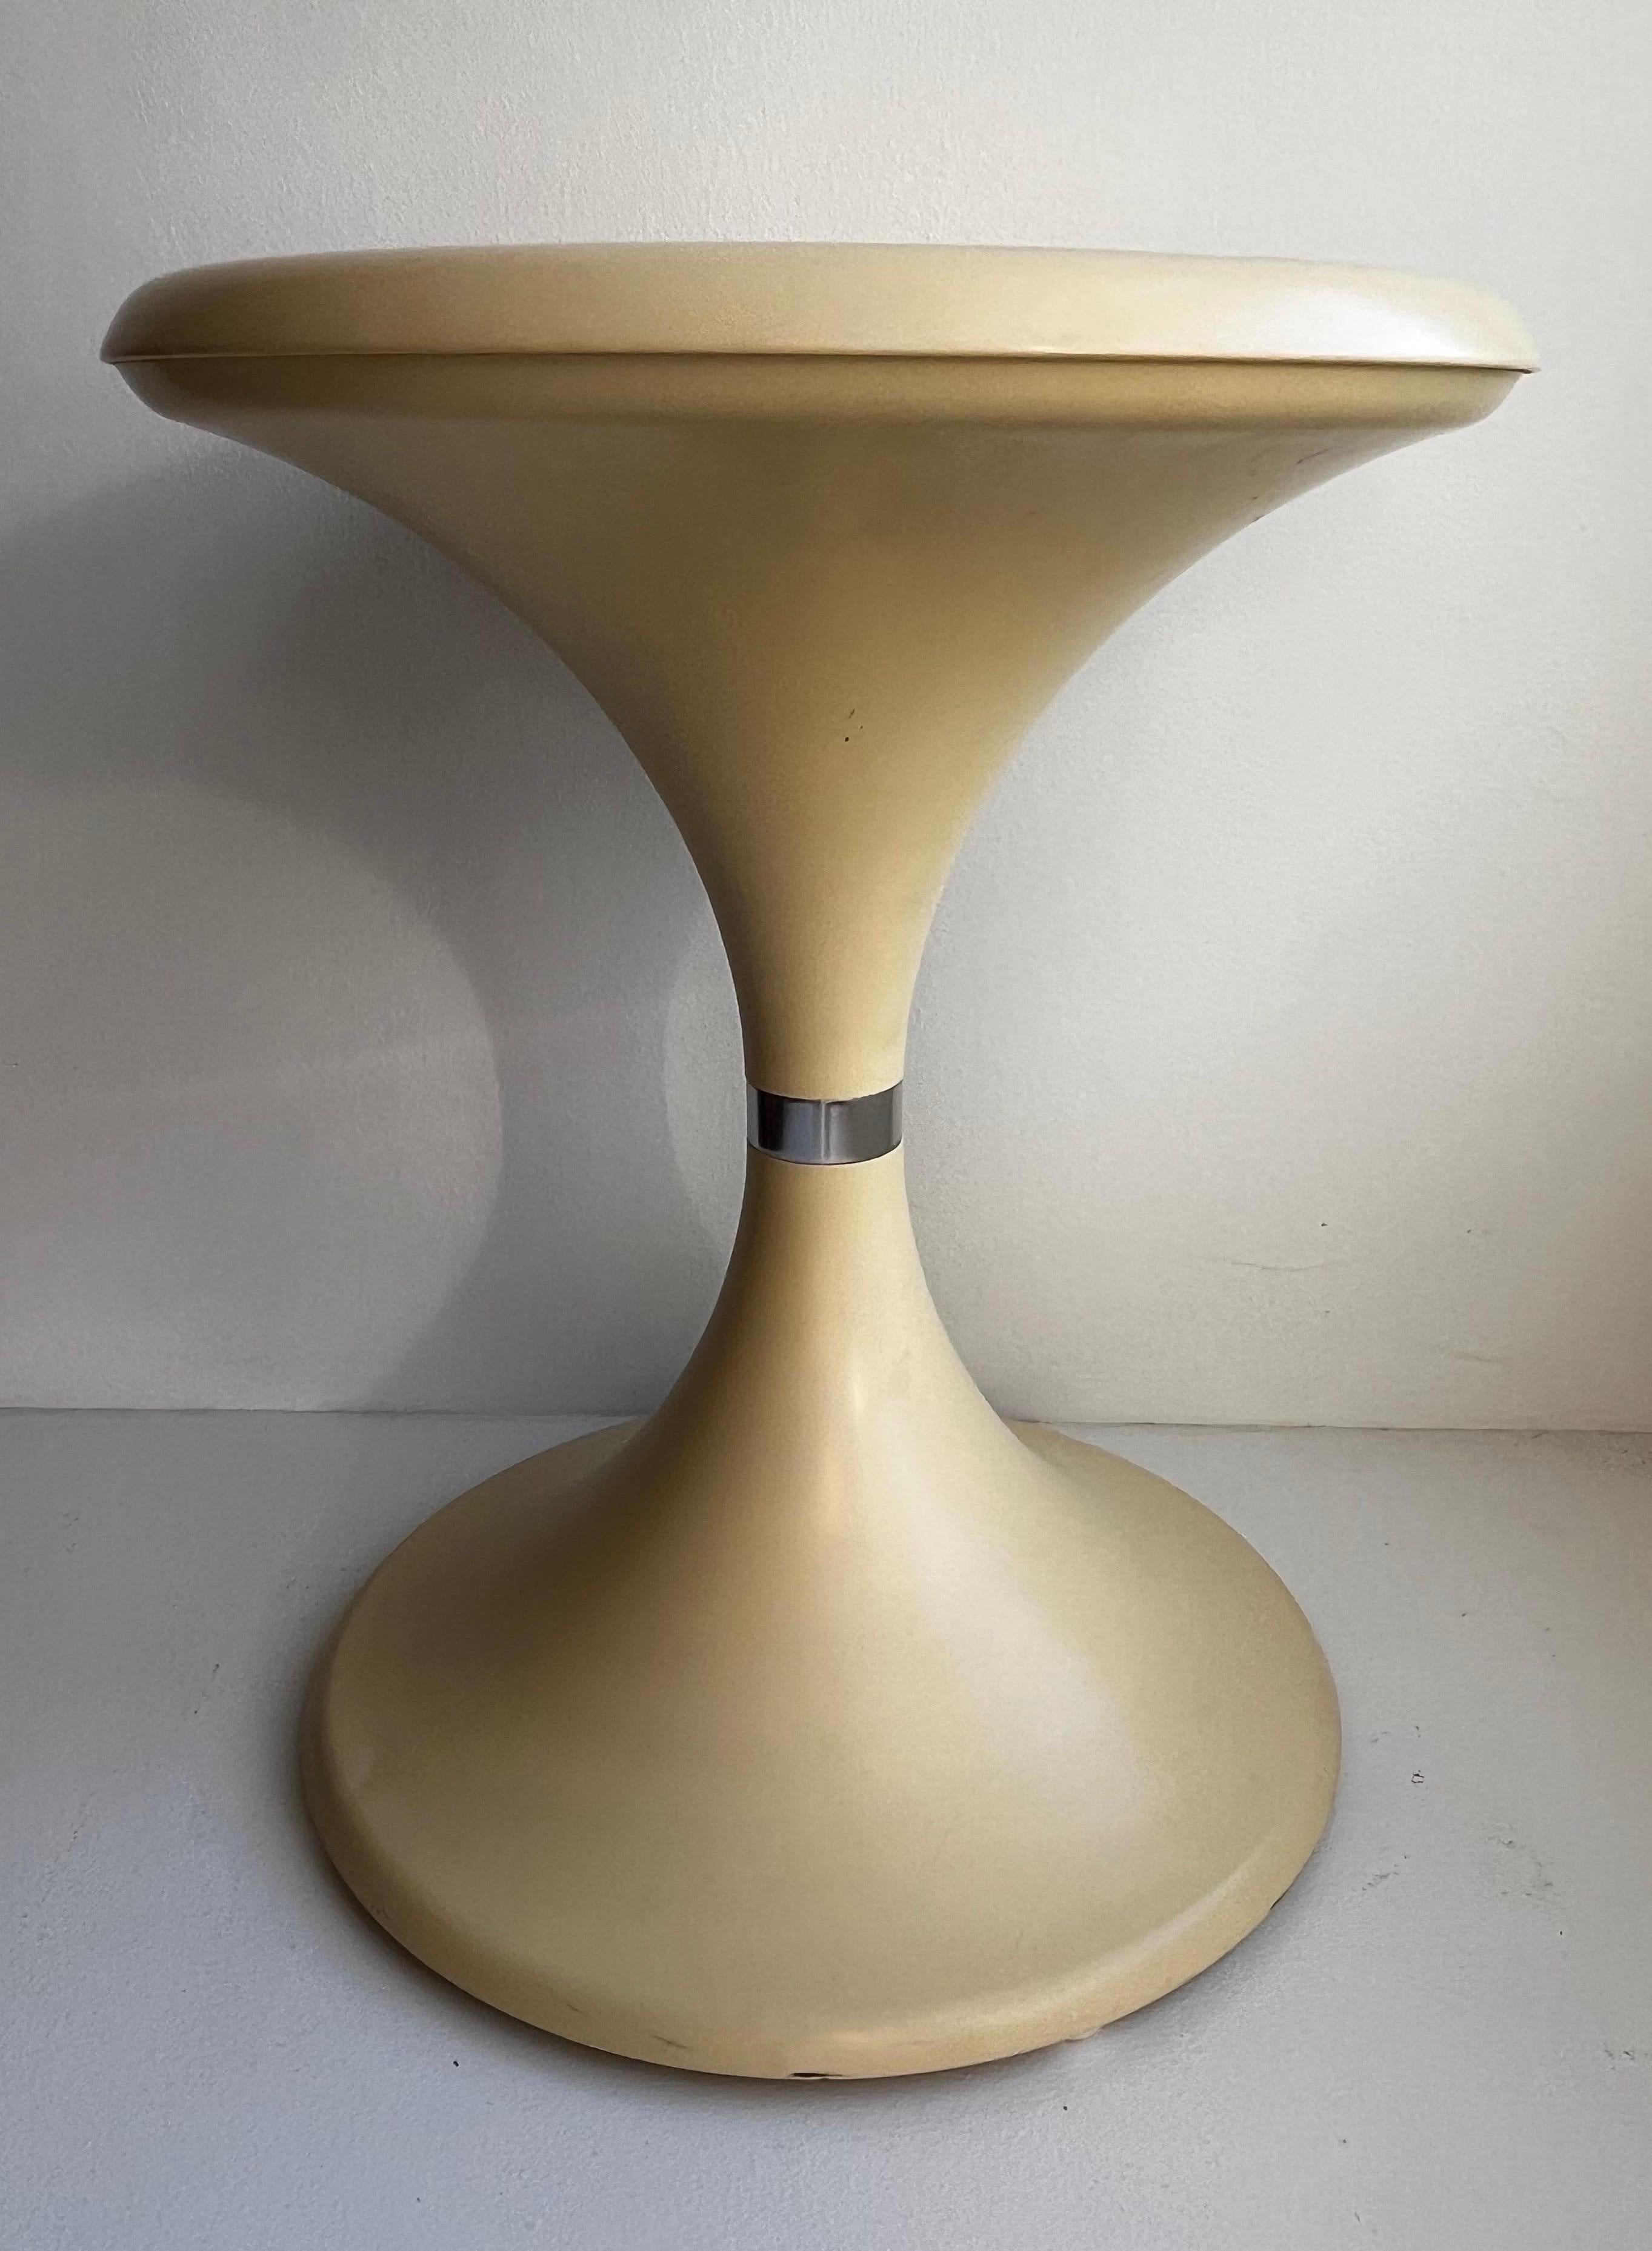 Plastic Space Age End Table / Stool in the Style of I. Gardella & A. Castelli, c. 1960s For Sale